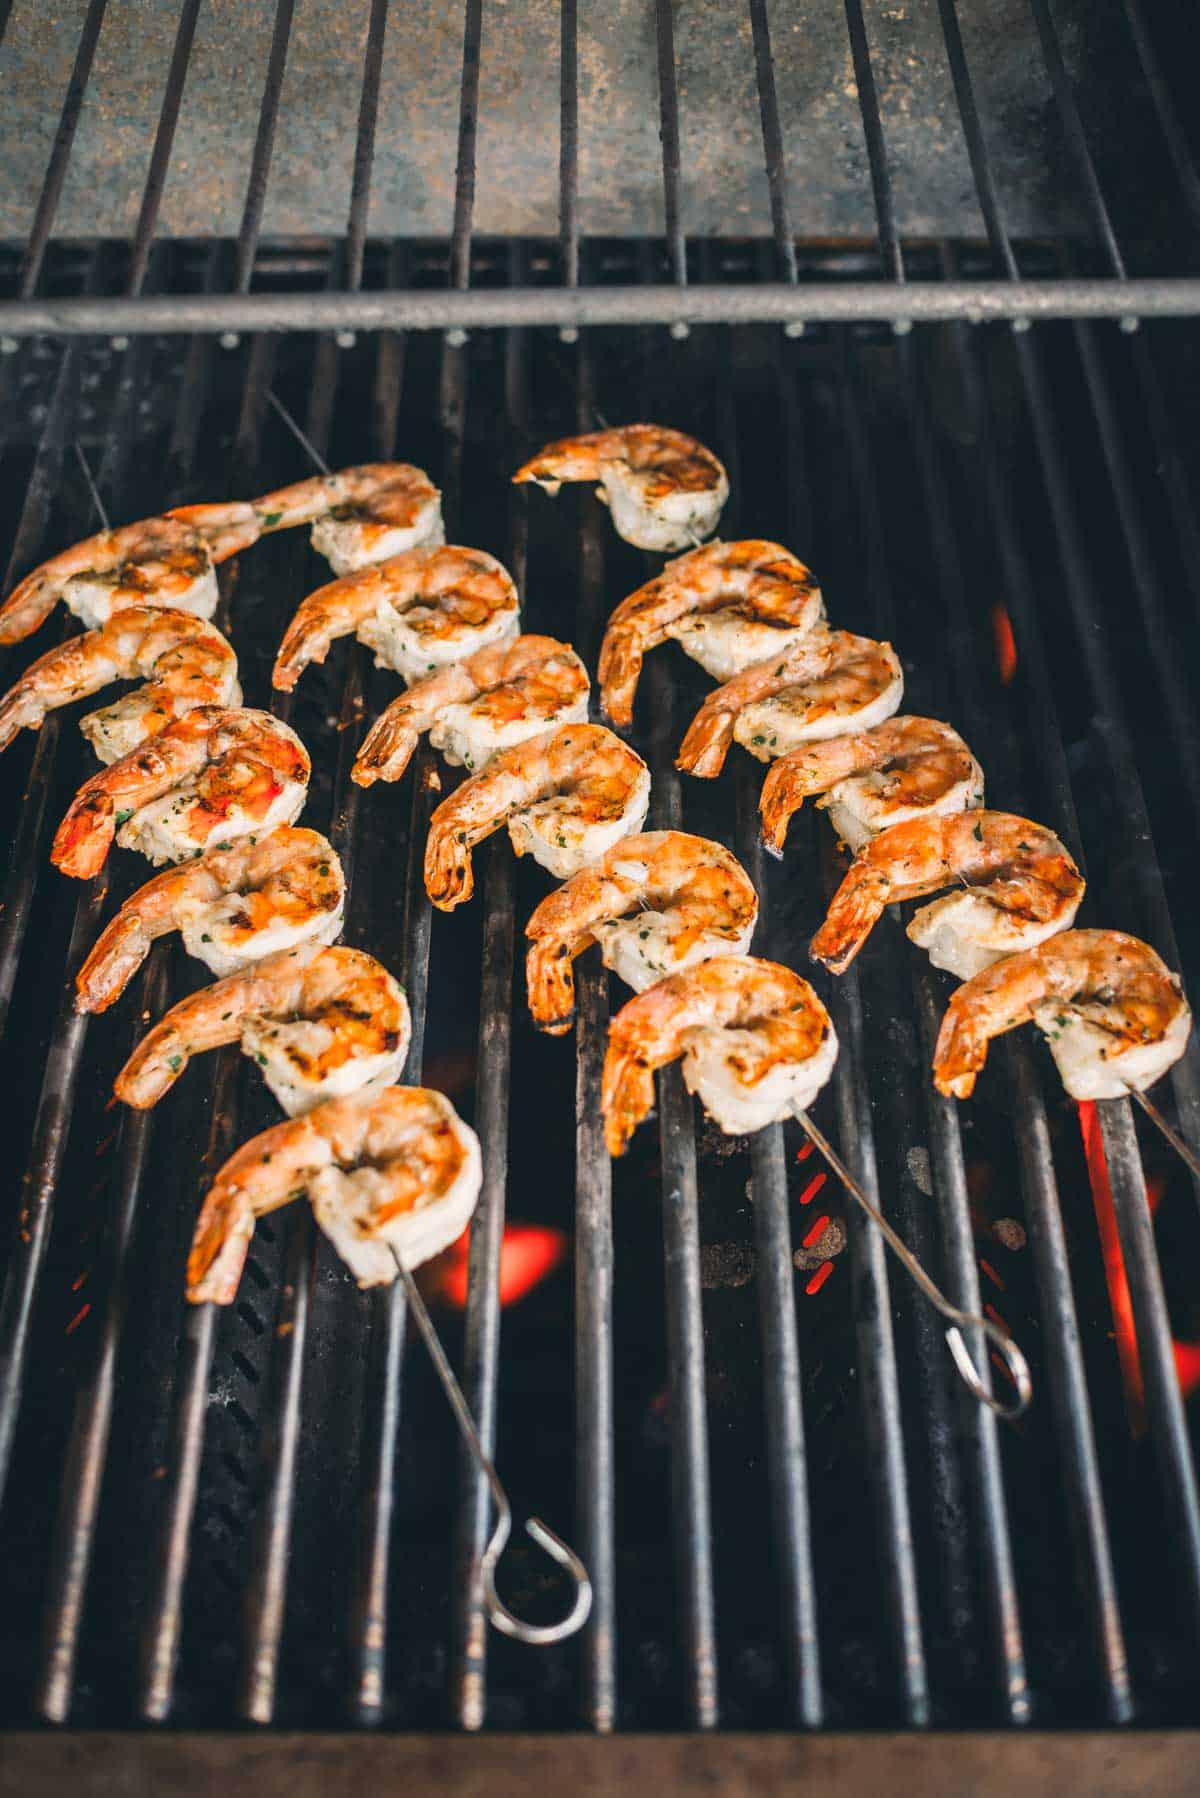 Shrimp is being grilled on skewers over an open flame.